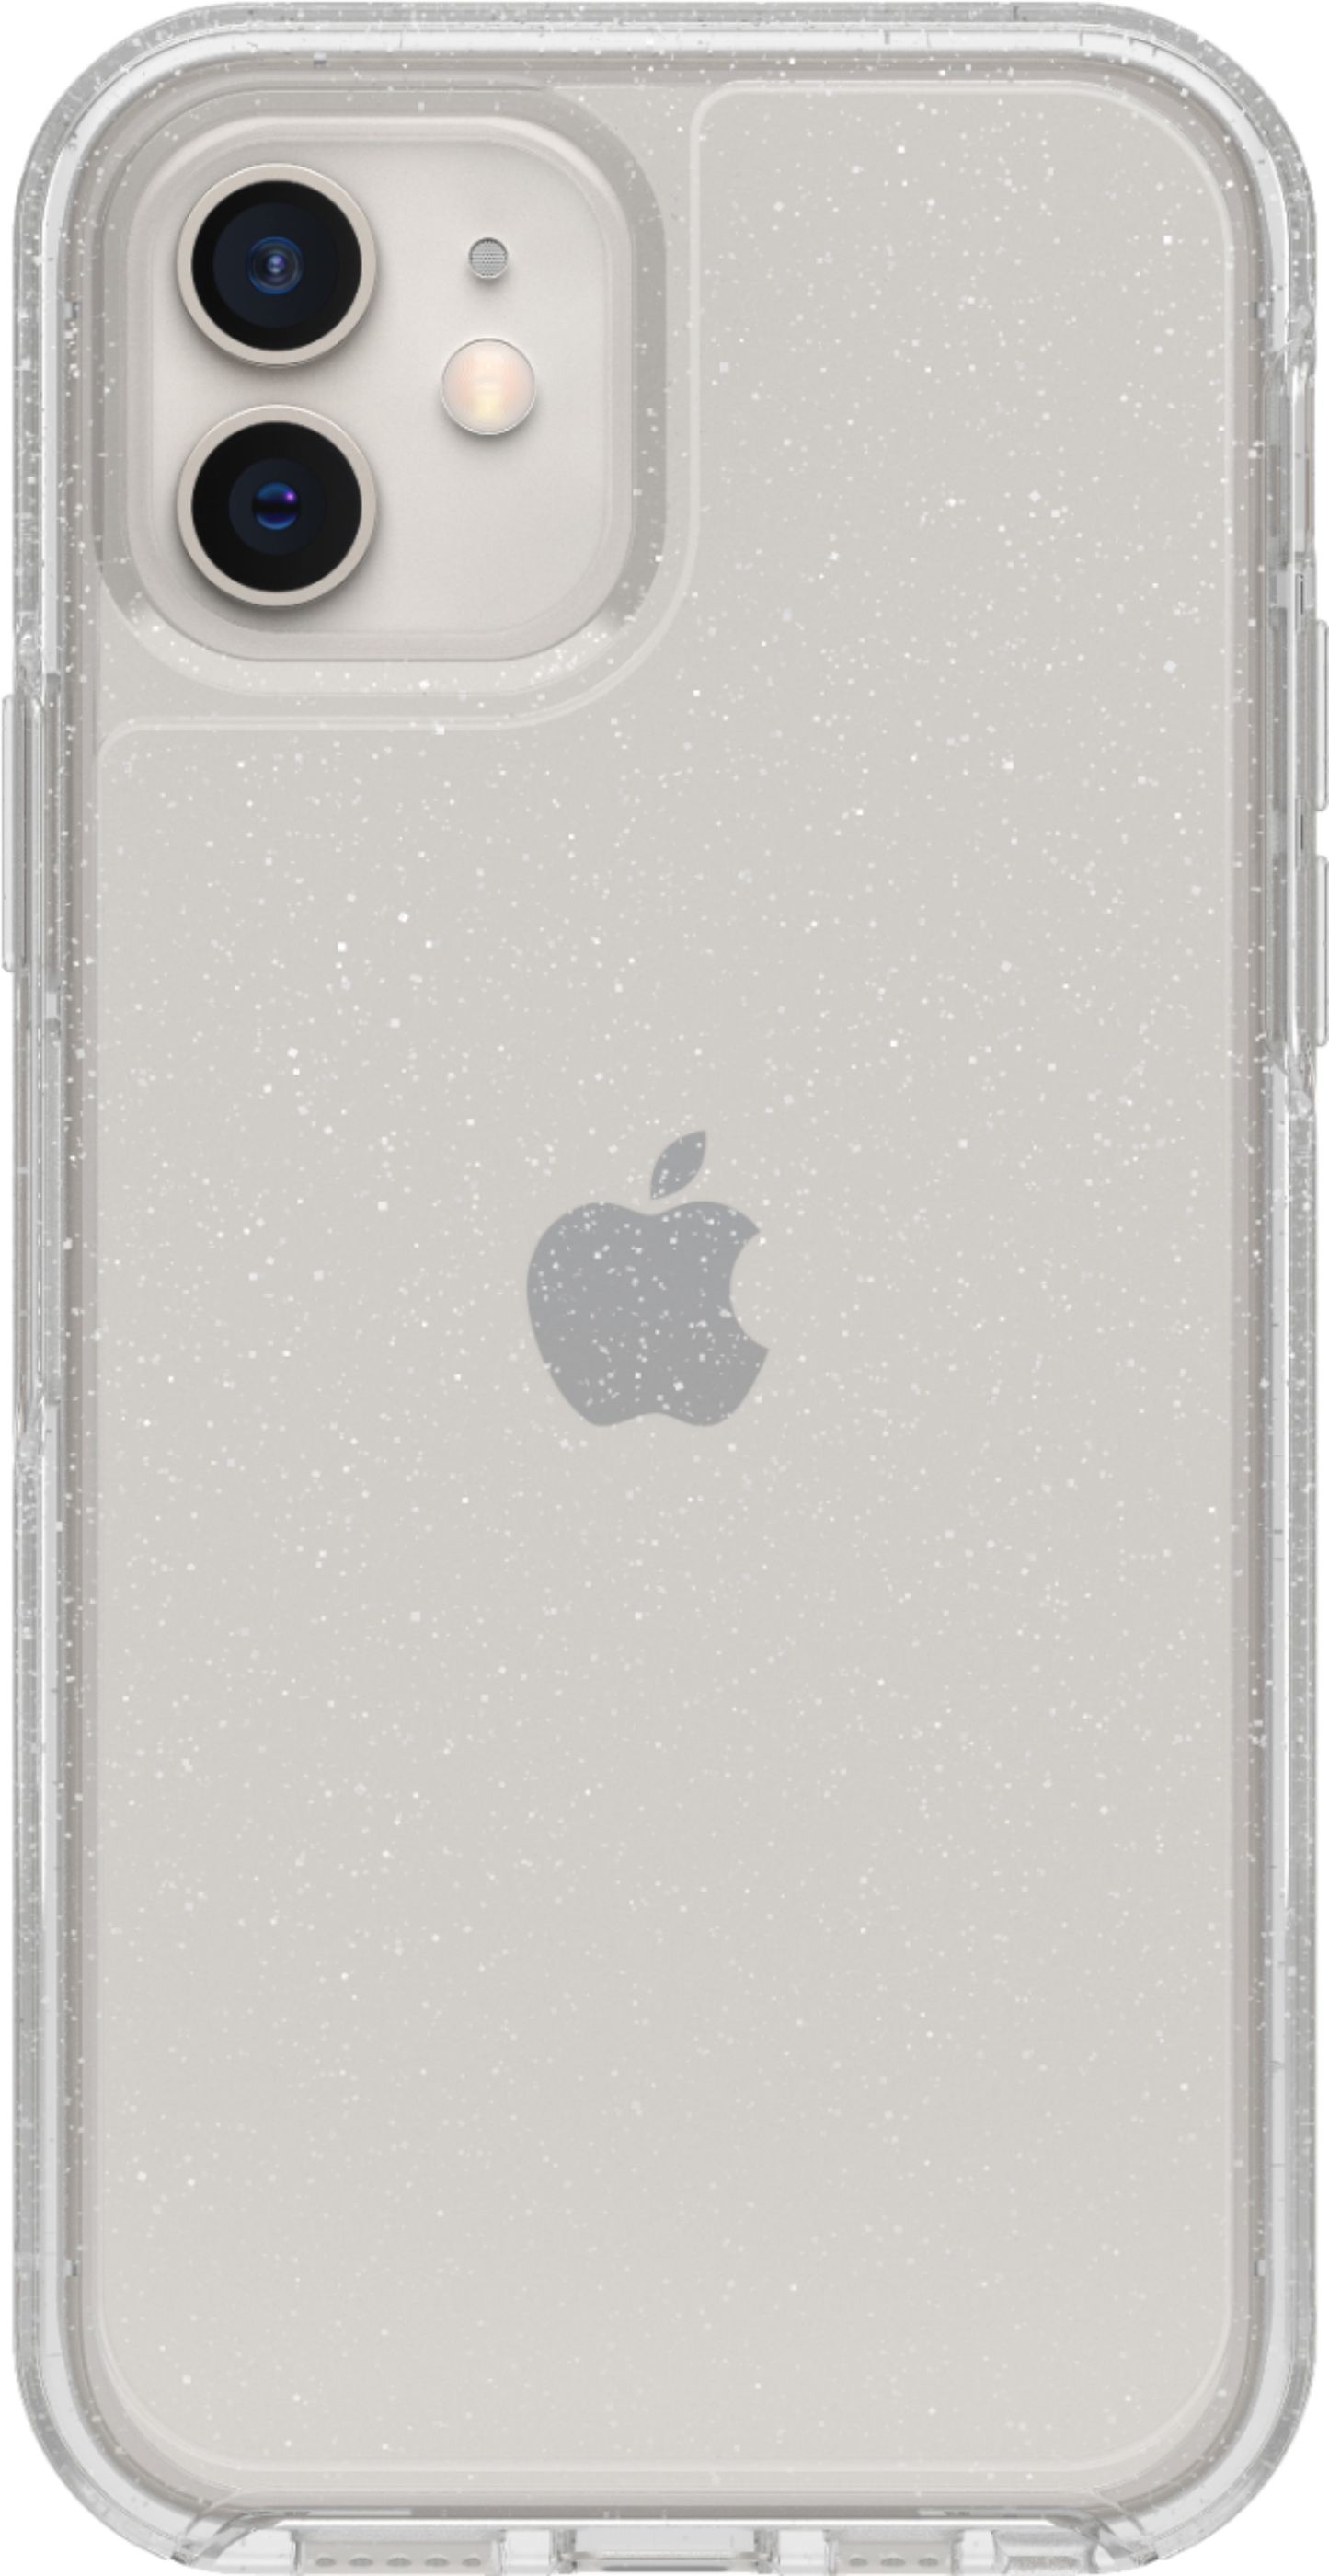 Iphone 12 Pro Case - Buy Iphone 12 Pro Case online at Best Prices